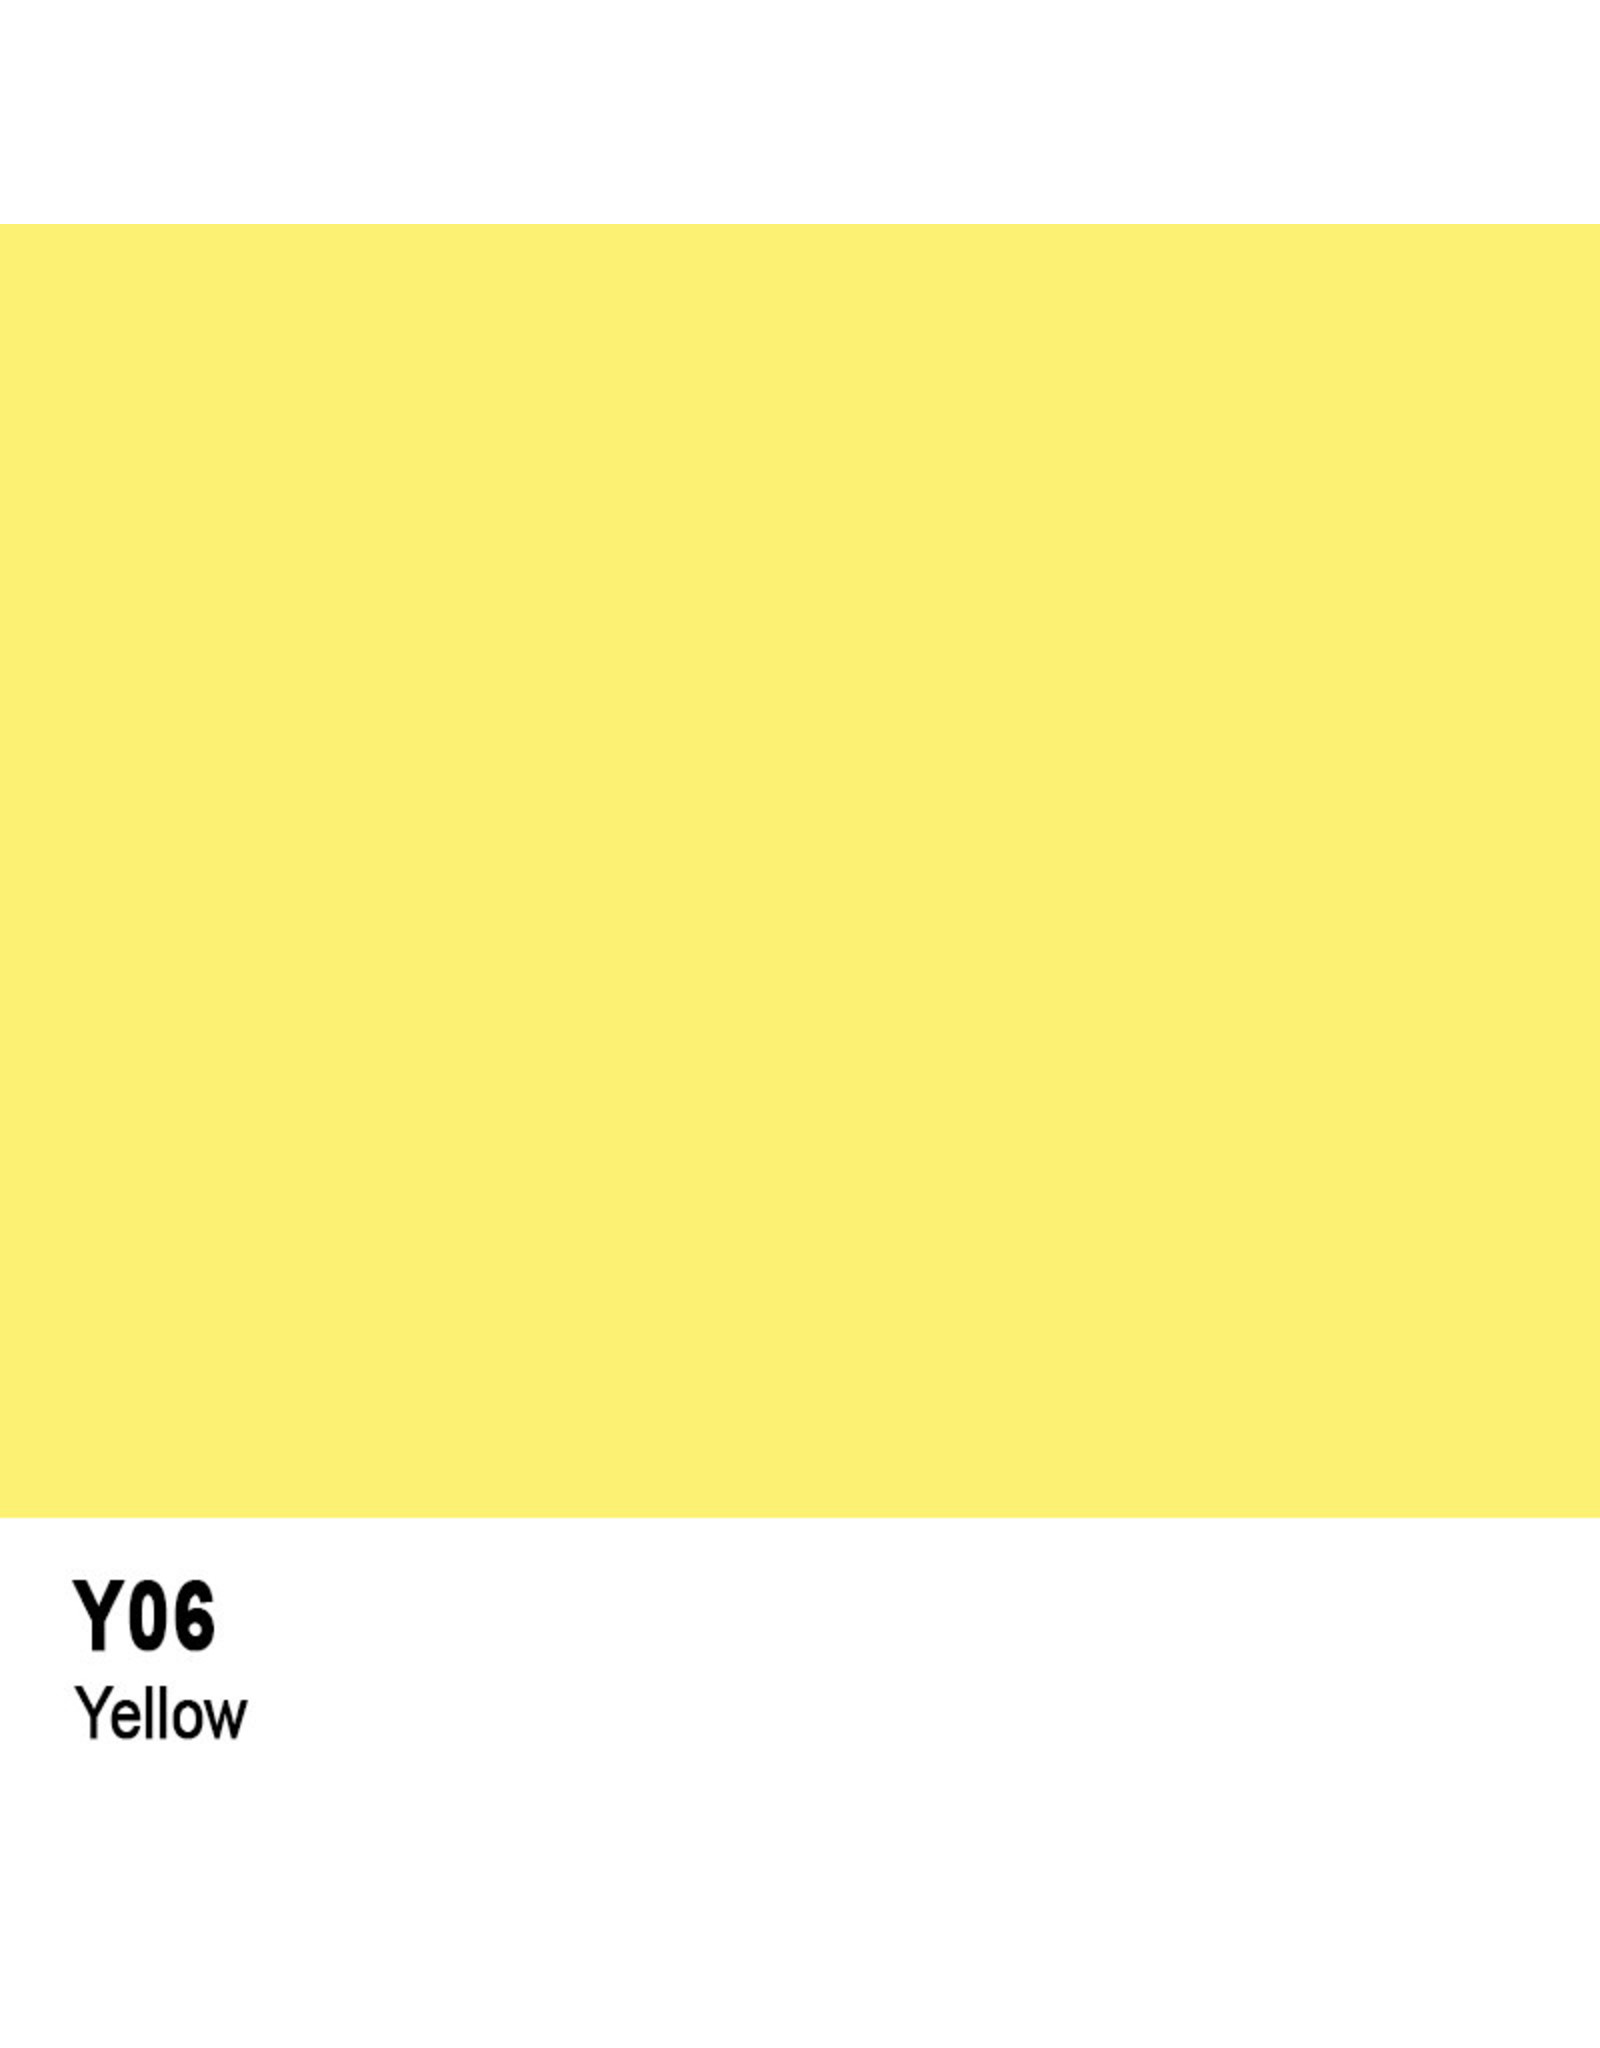 COPIC COPIC Y06 YELLOW REFILL